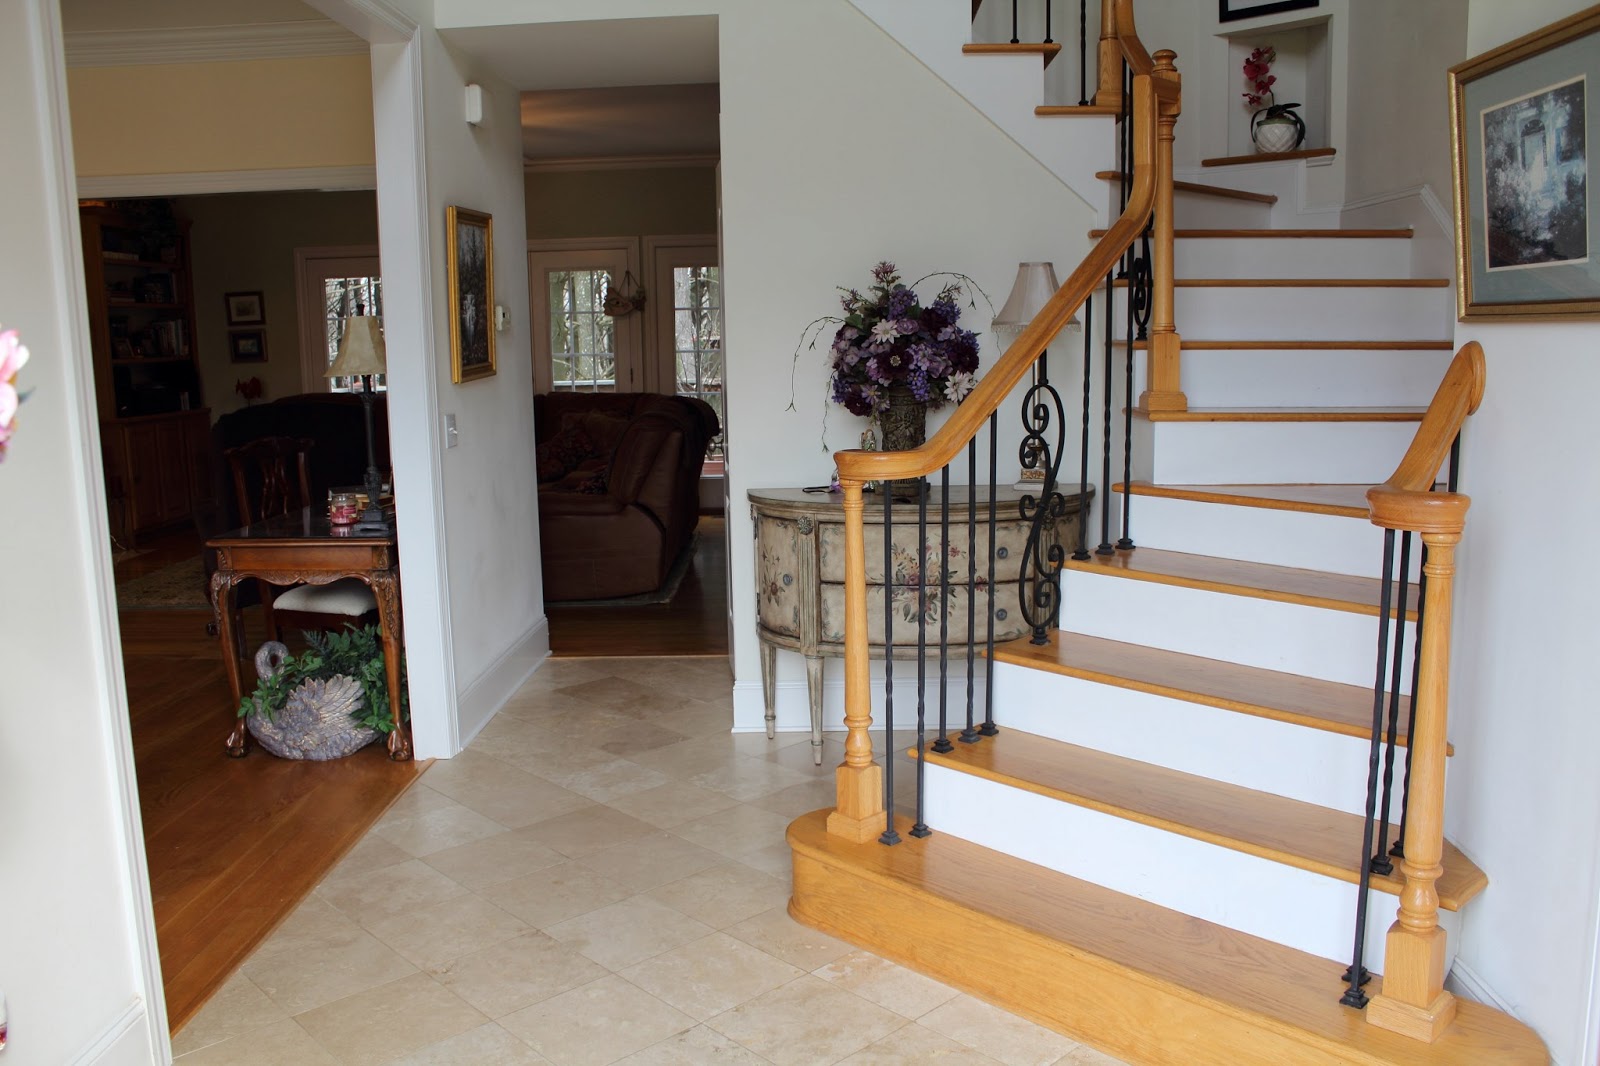 Sewanee Tennessee Home For Sale Foyer and Stairway To 